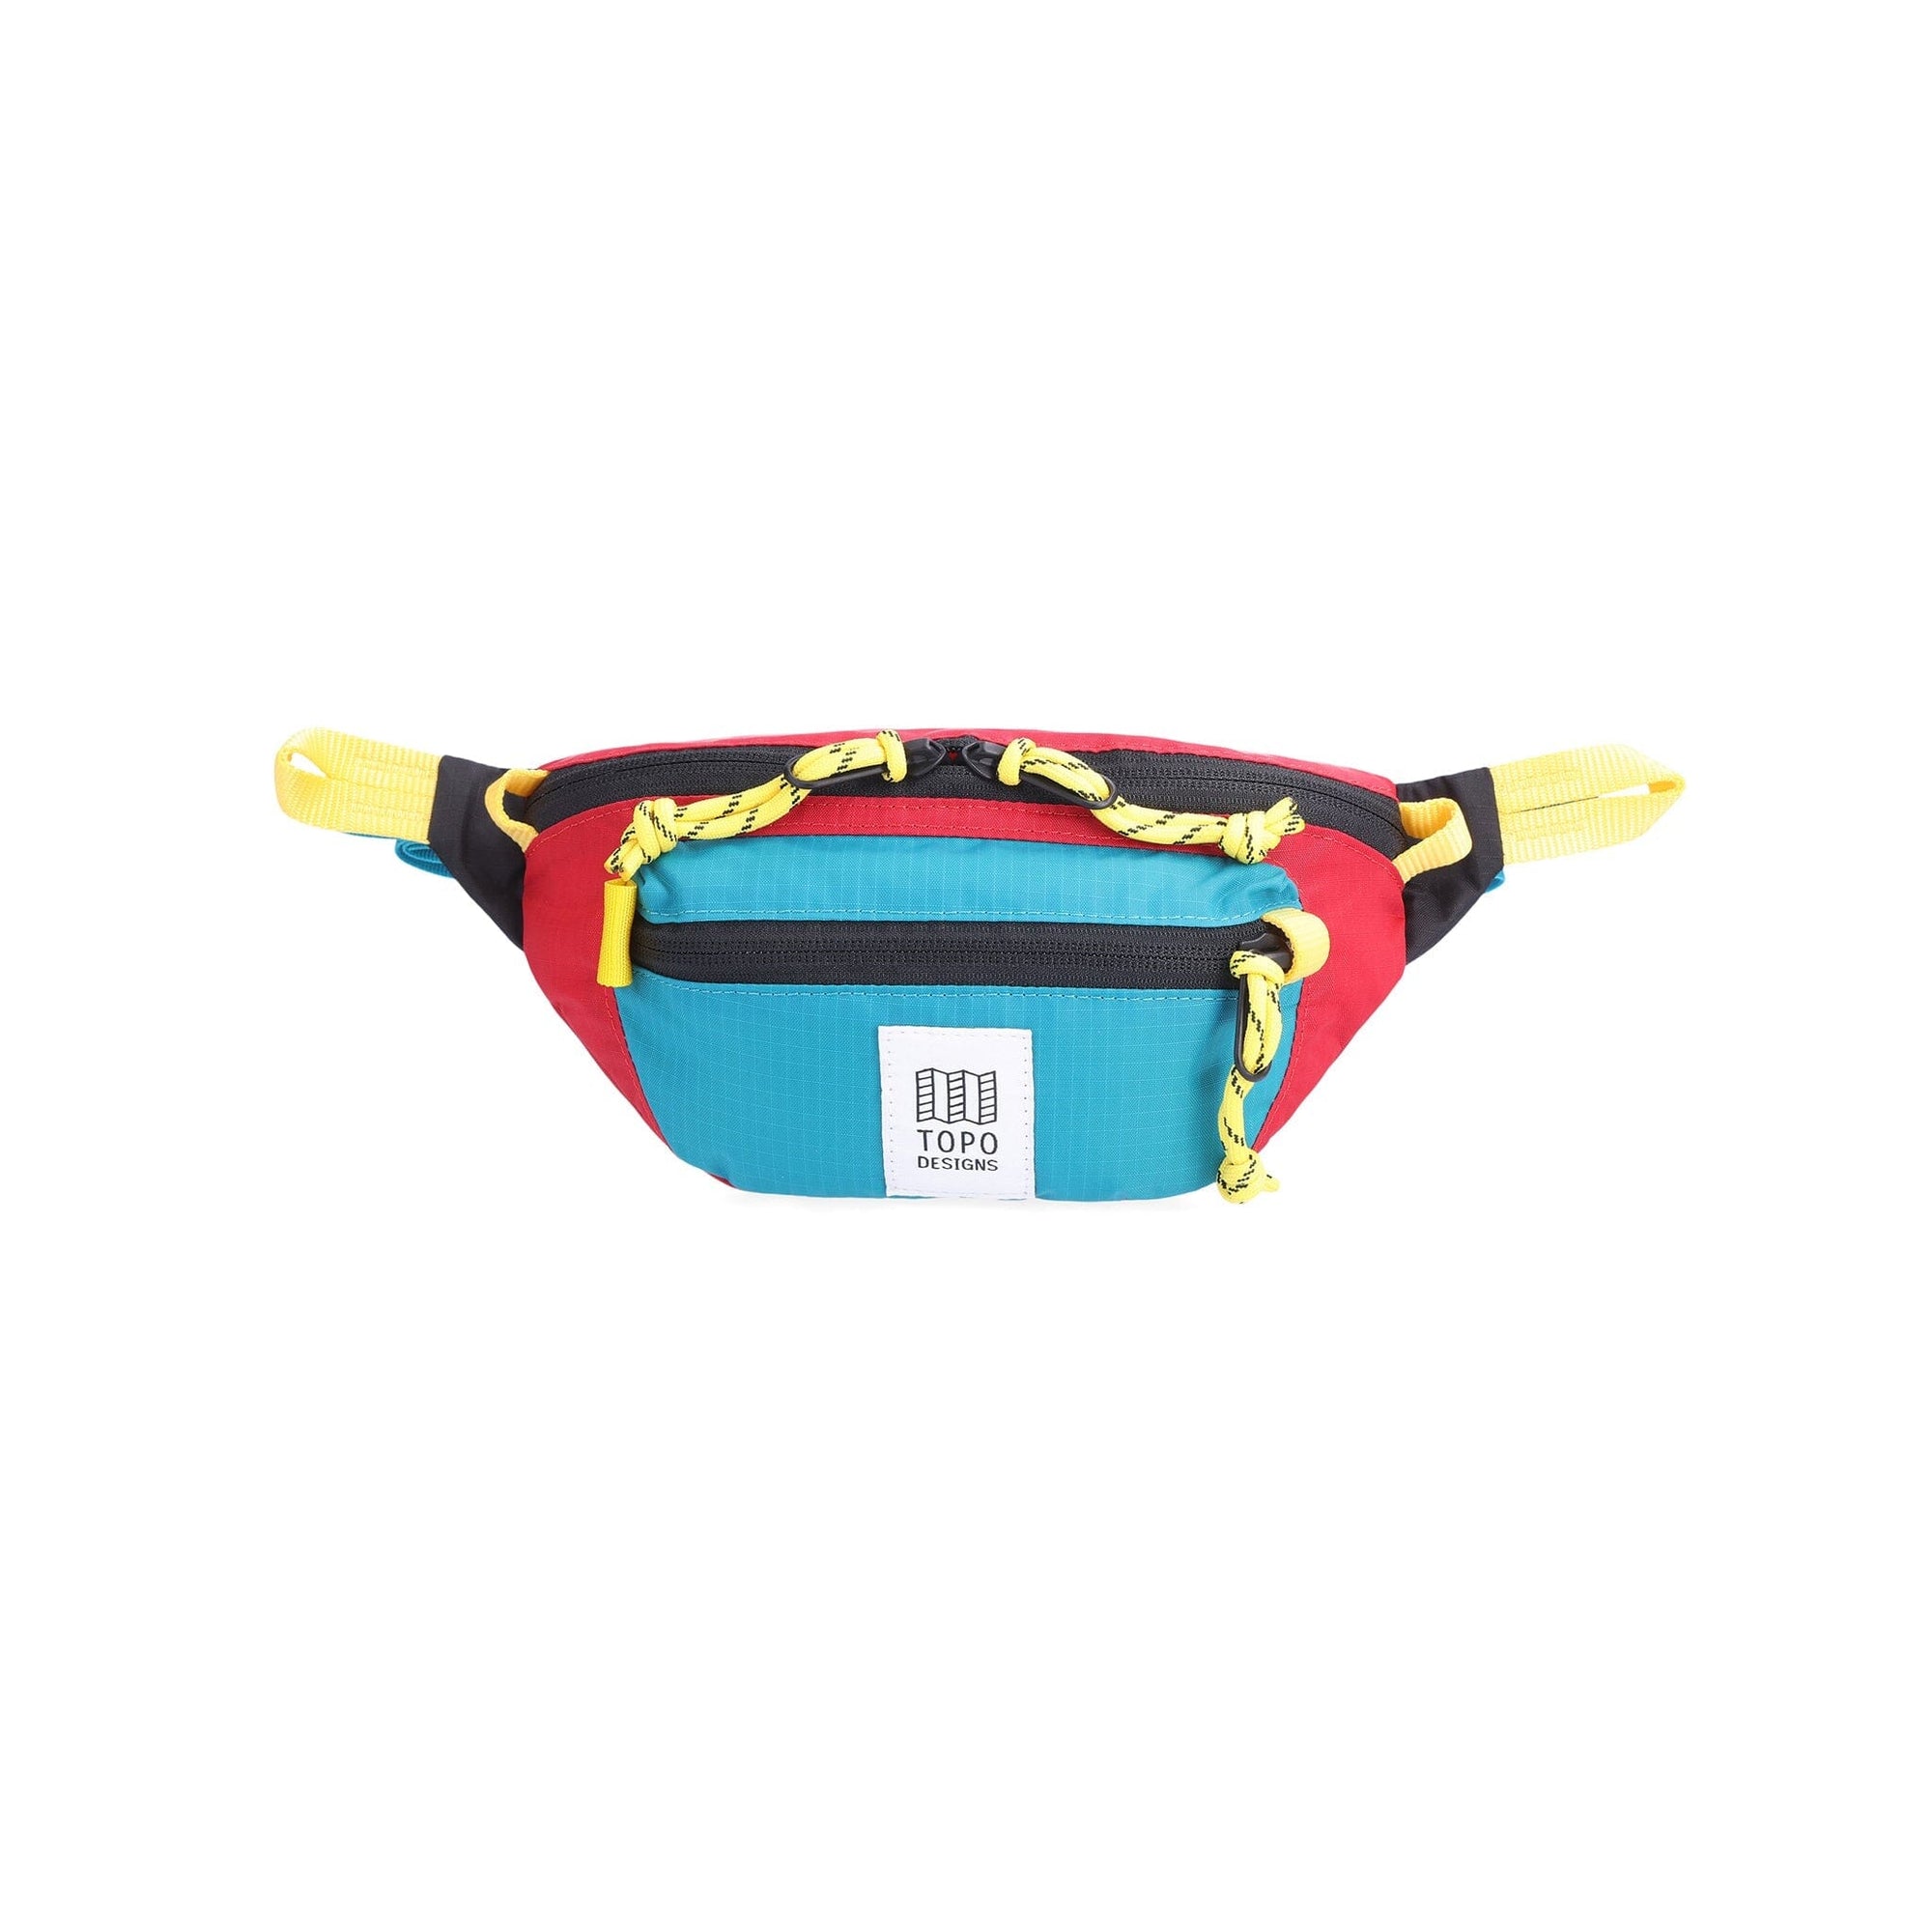 Topo Designs Mountain Waist Pack Red/Turquoise bags Topo Designs 